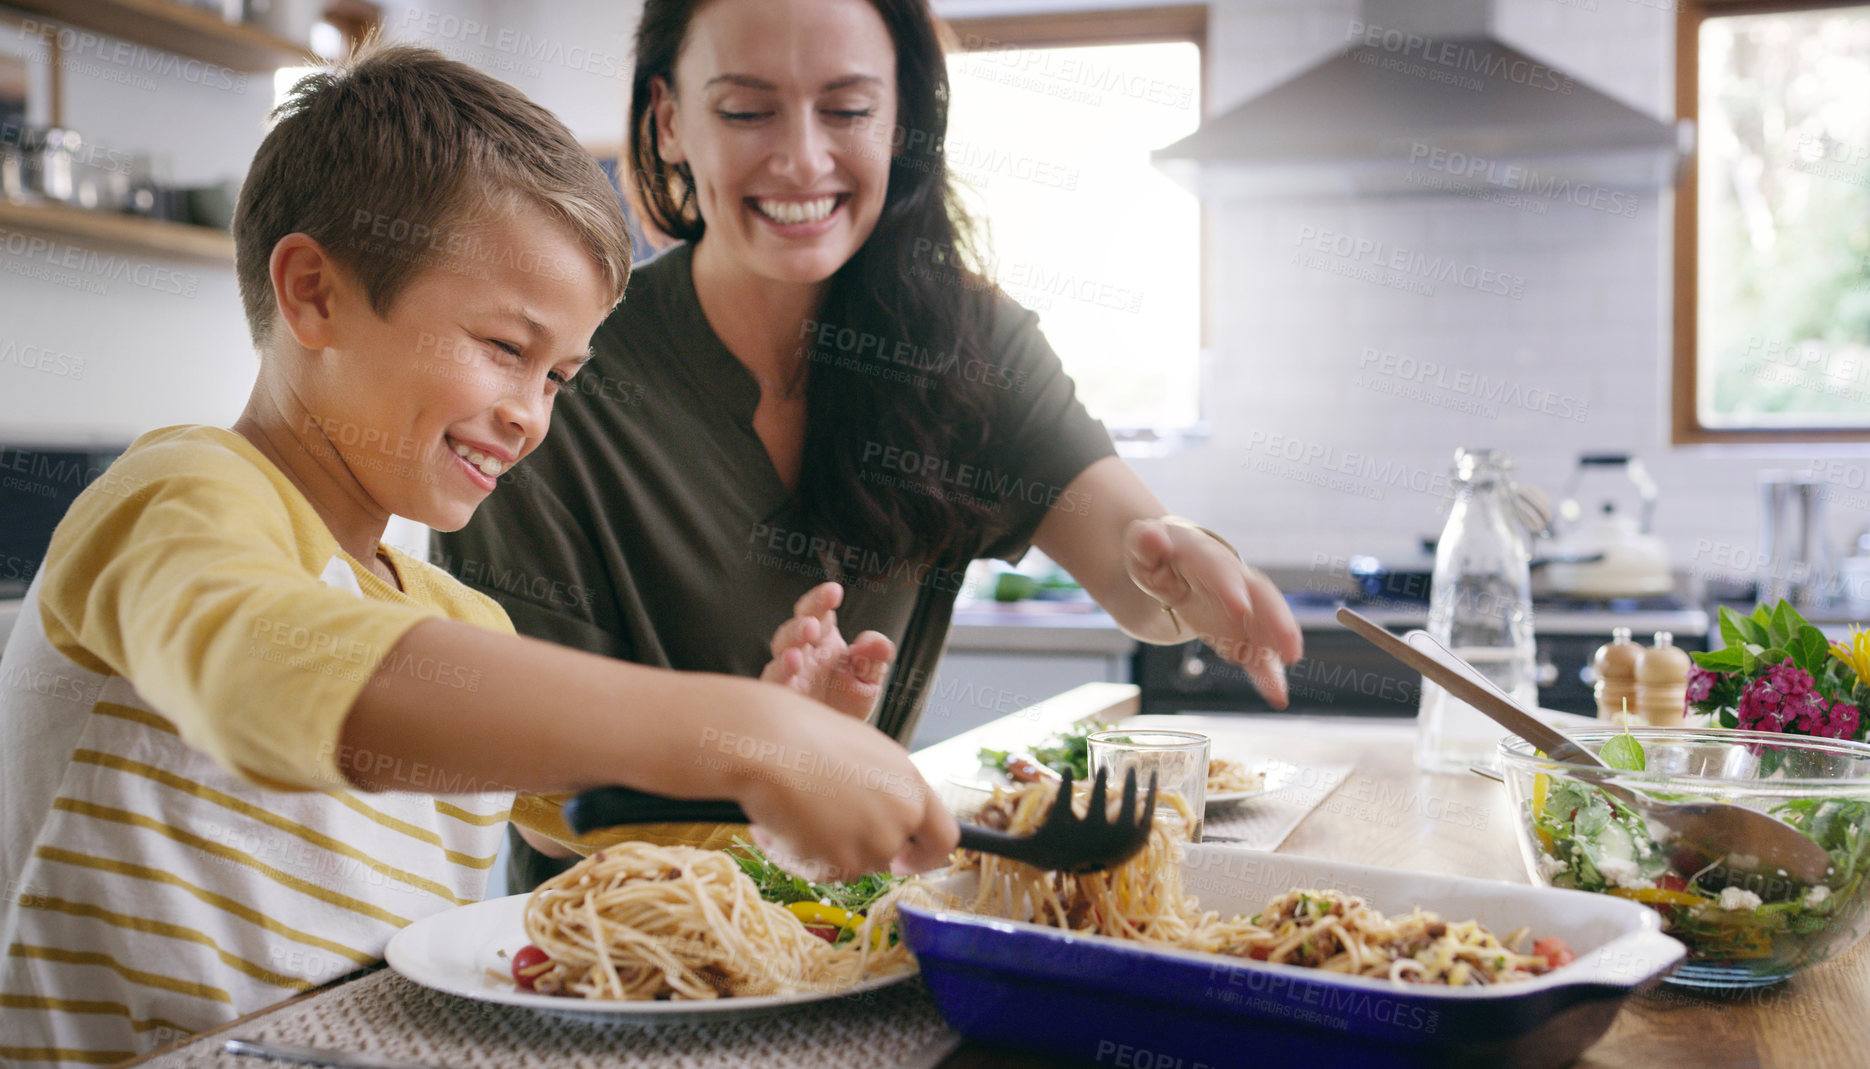 Buy stock photo Cropped shot of an affectionate young mother serving her son during a meal on their kitchen table